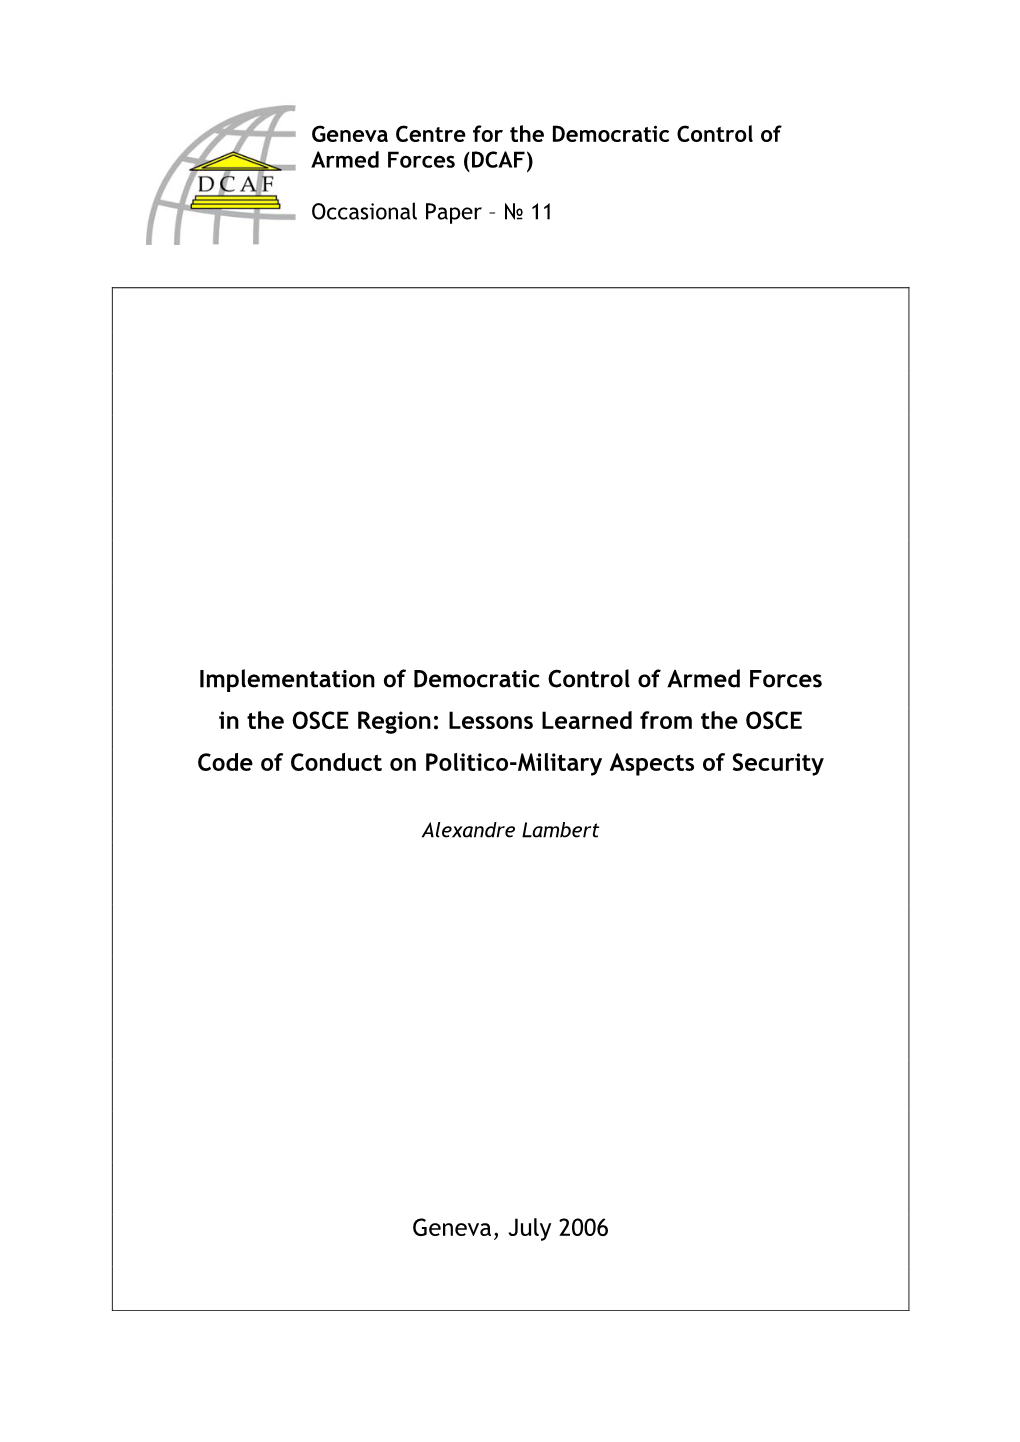 Implementation of Democratic Control of Armed Forces in the OSCE Region: Lessons Learned from the OSCE Code of Conduct on Politico-Military Aspects of Security